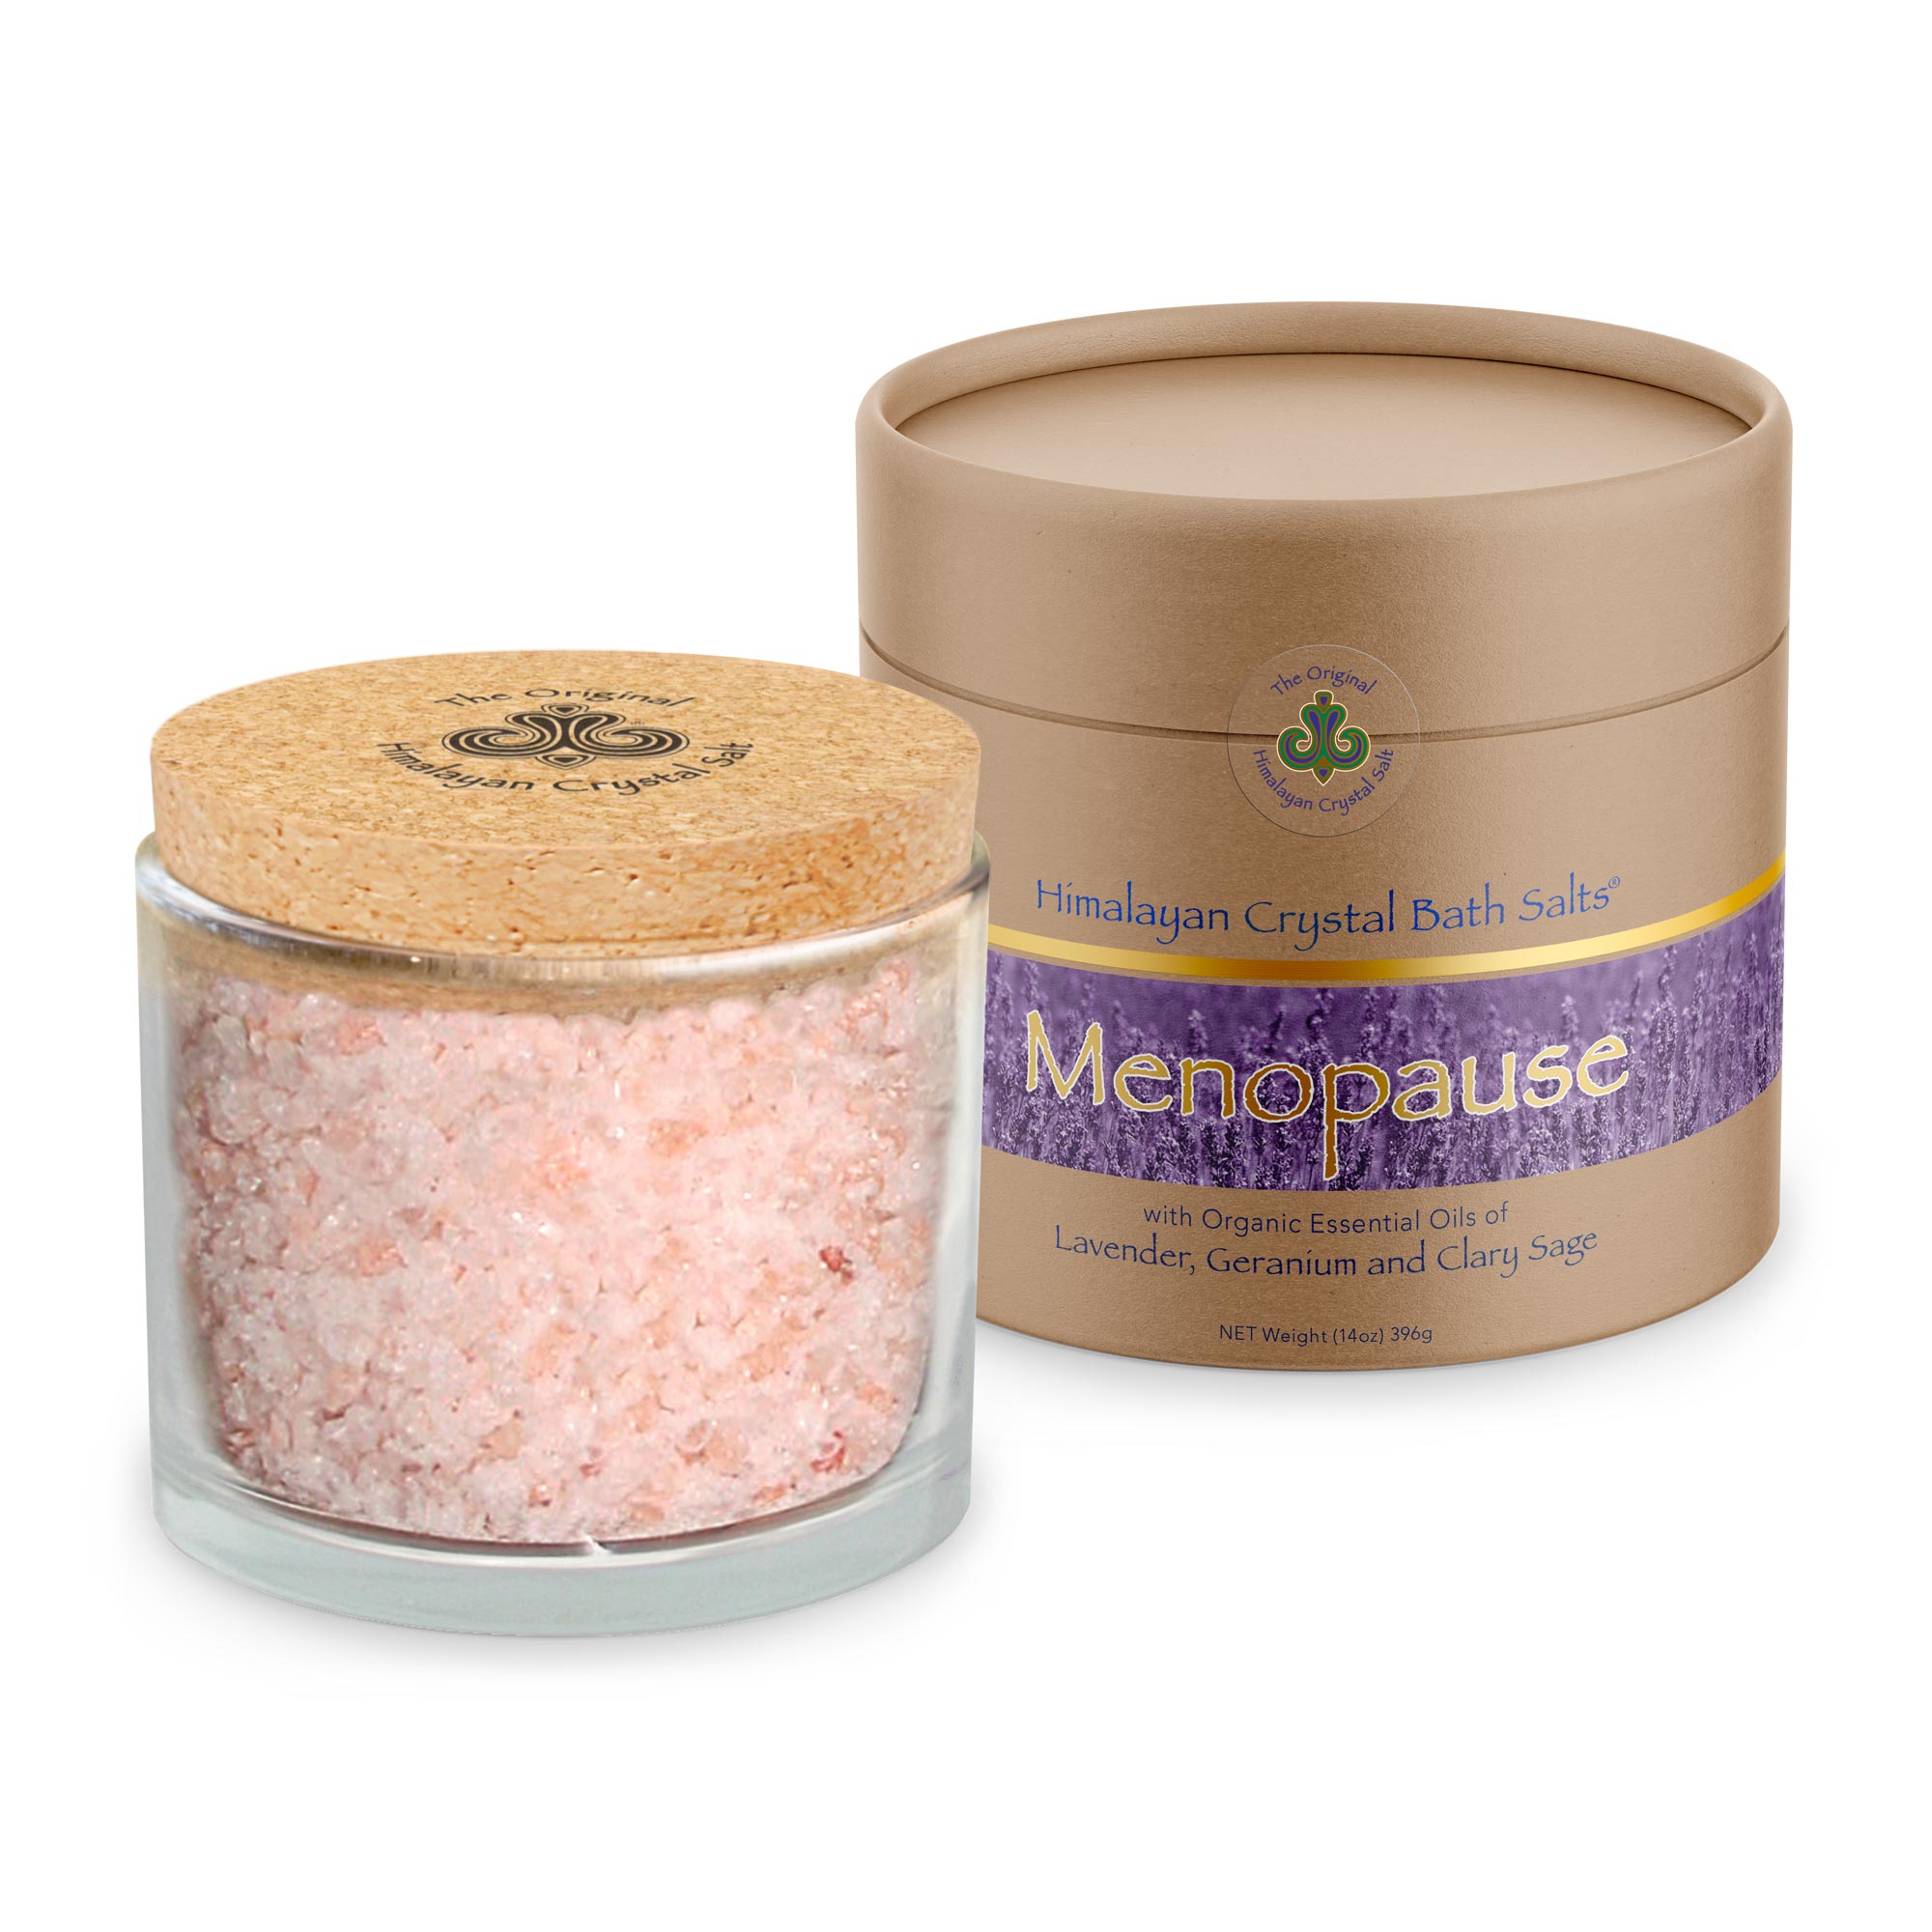 Menopause symptoms like hot flashes, night sweats, mood swings and more stressing you out? Look no further for a way to unwind. This mineral-rich, soothing bath blend helps ease aches and pains, calm the mind, and may promote restful sleep. Relax with 100% organic lavender, germanium, and clary sage essential oils.